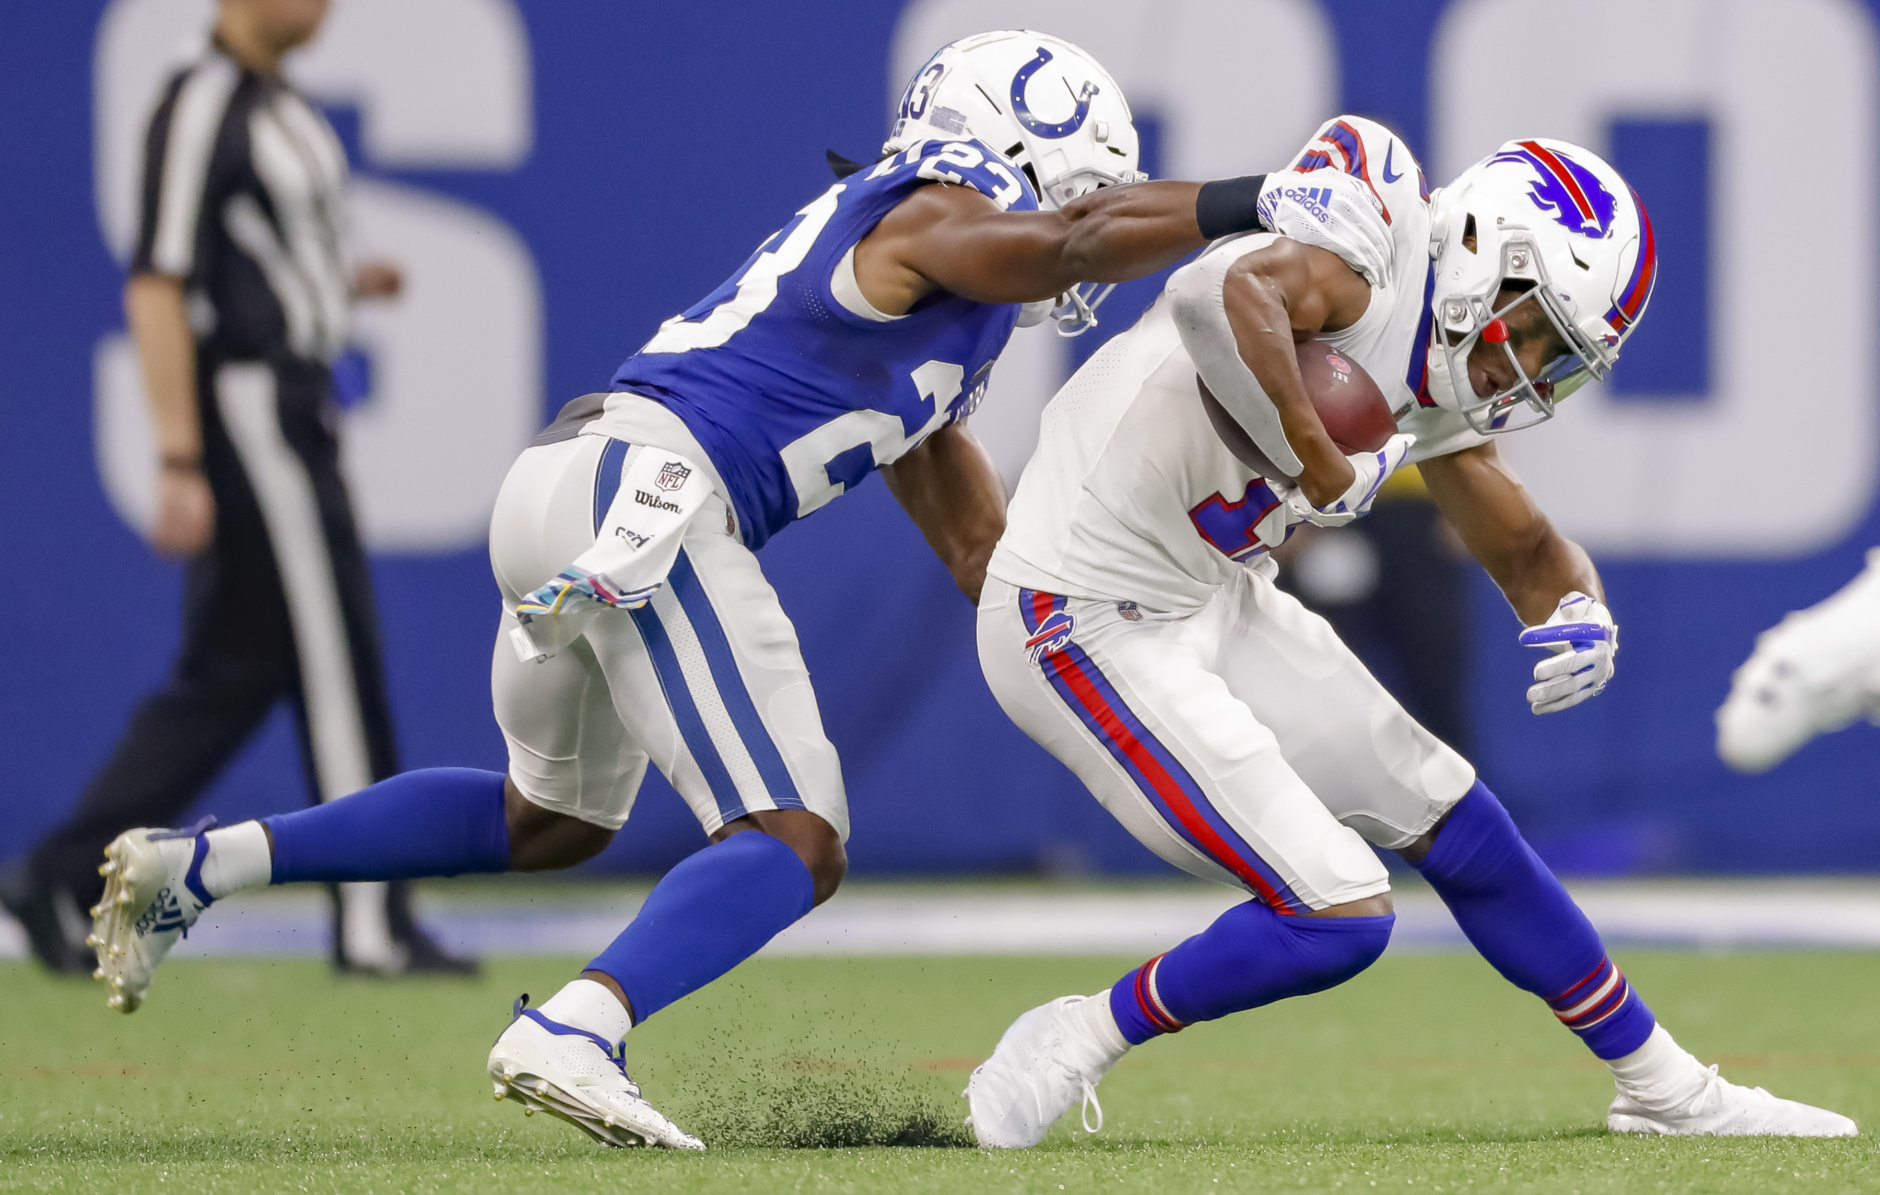 INDIANAPOLIS, IN - OCTOBER 21: Kenny Moore #23 of the Indianapolis Colts makes the tackle from behind on Zay Jones #11 of the Buffalo Bills at Lucas Oil Stadium on October 21, 2018 in Indianapolis, Indiana. (Photo by Michael Hickey/Getty Images)